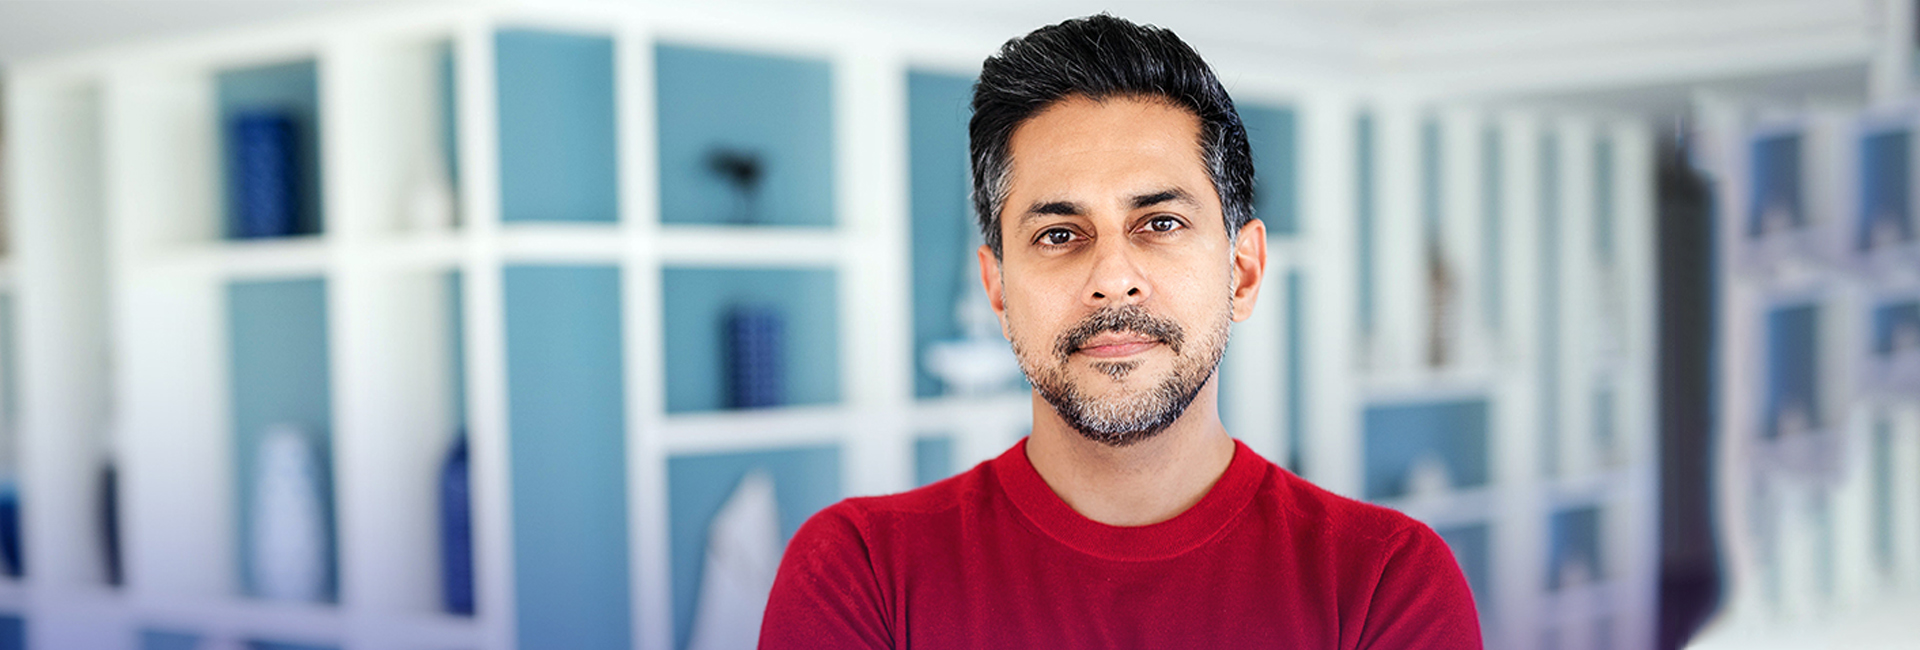 Entrepreneur Vishen Lakhiani talks about how to set goals and achieve them for real. Vishen outlines your new gameplan with regards to how to set goals and achieve them fast.